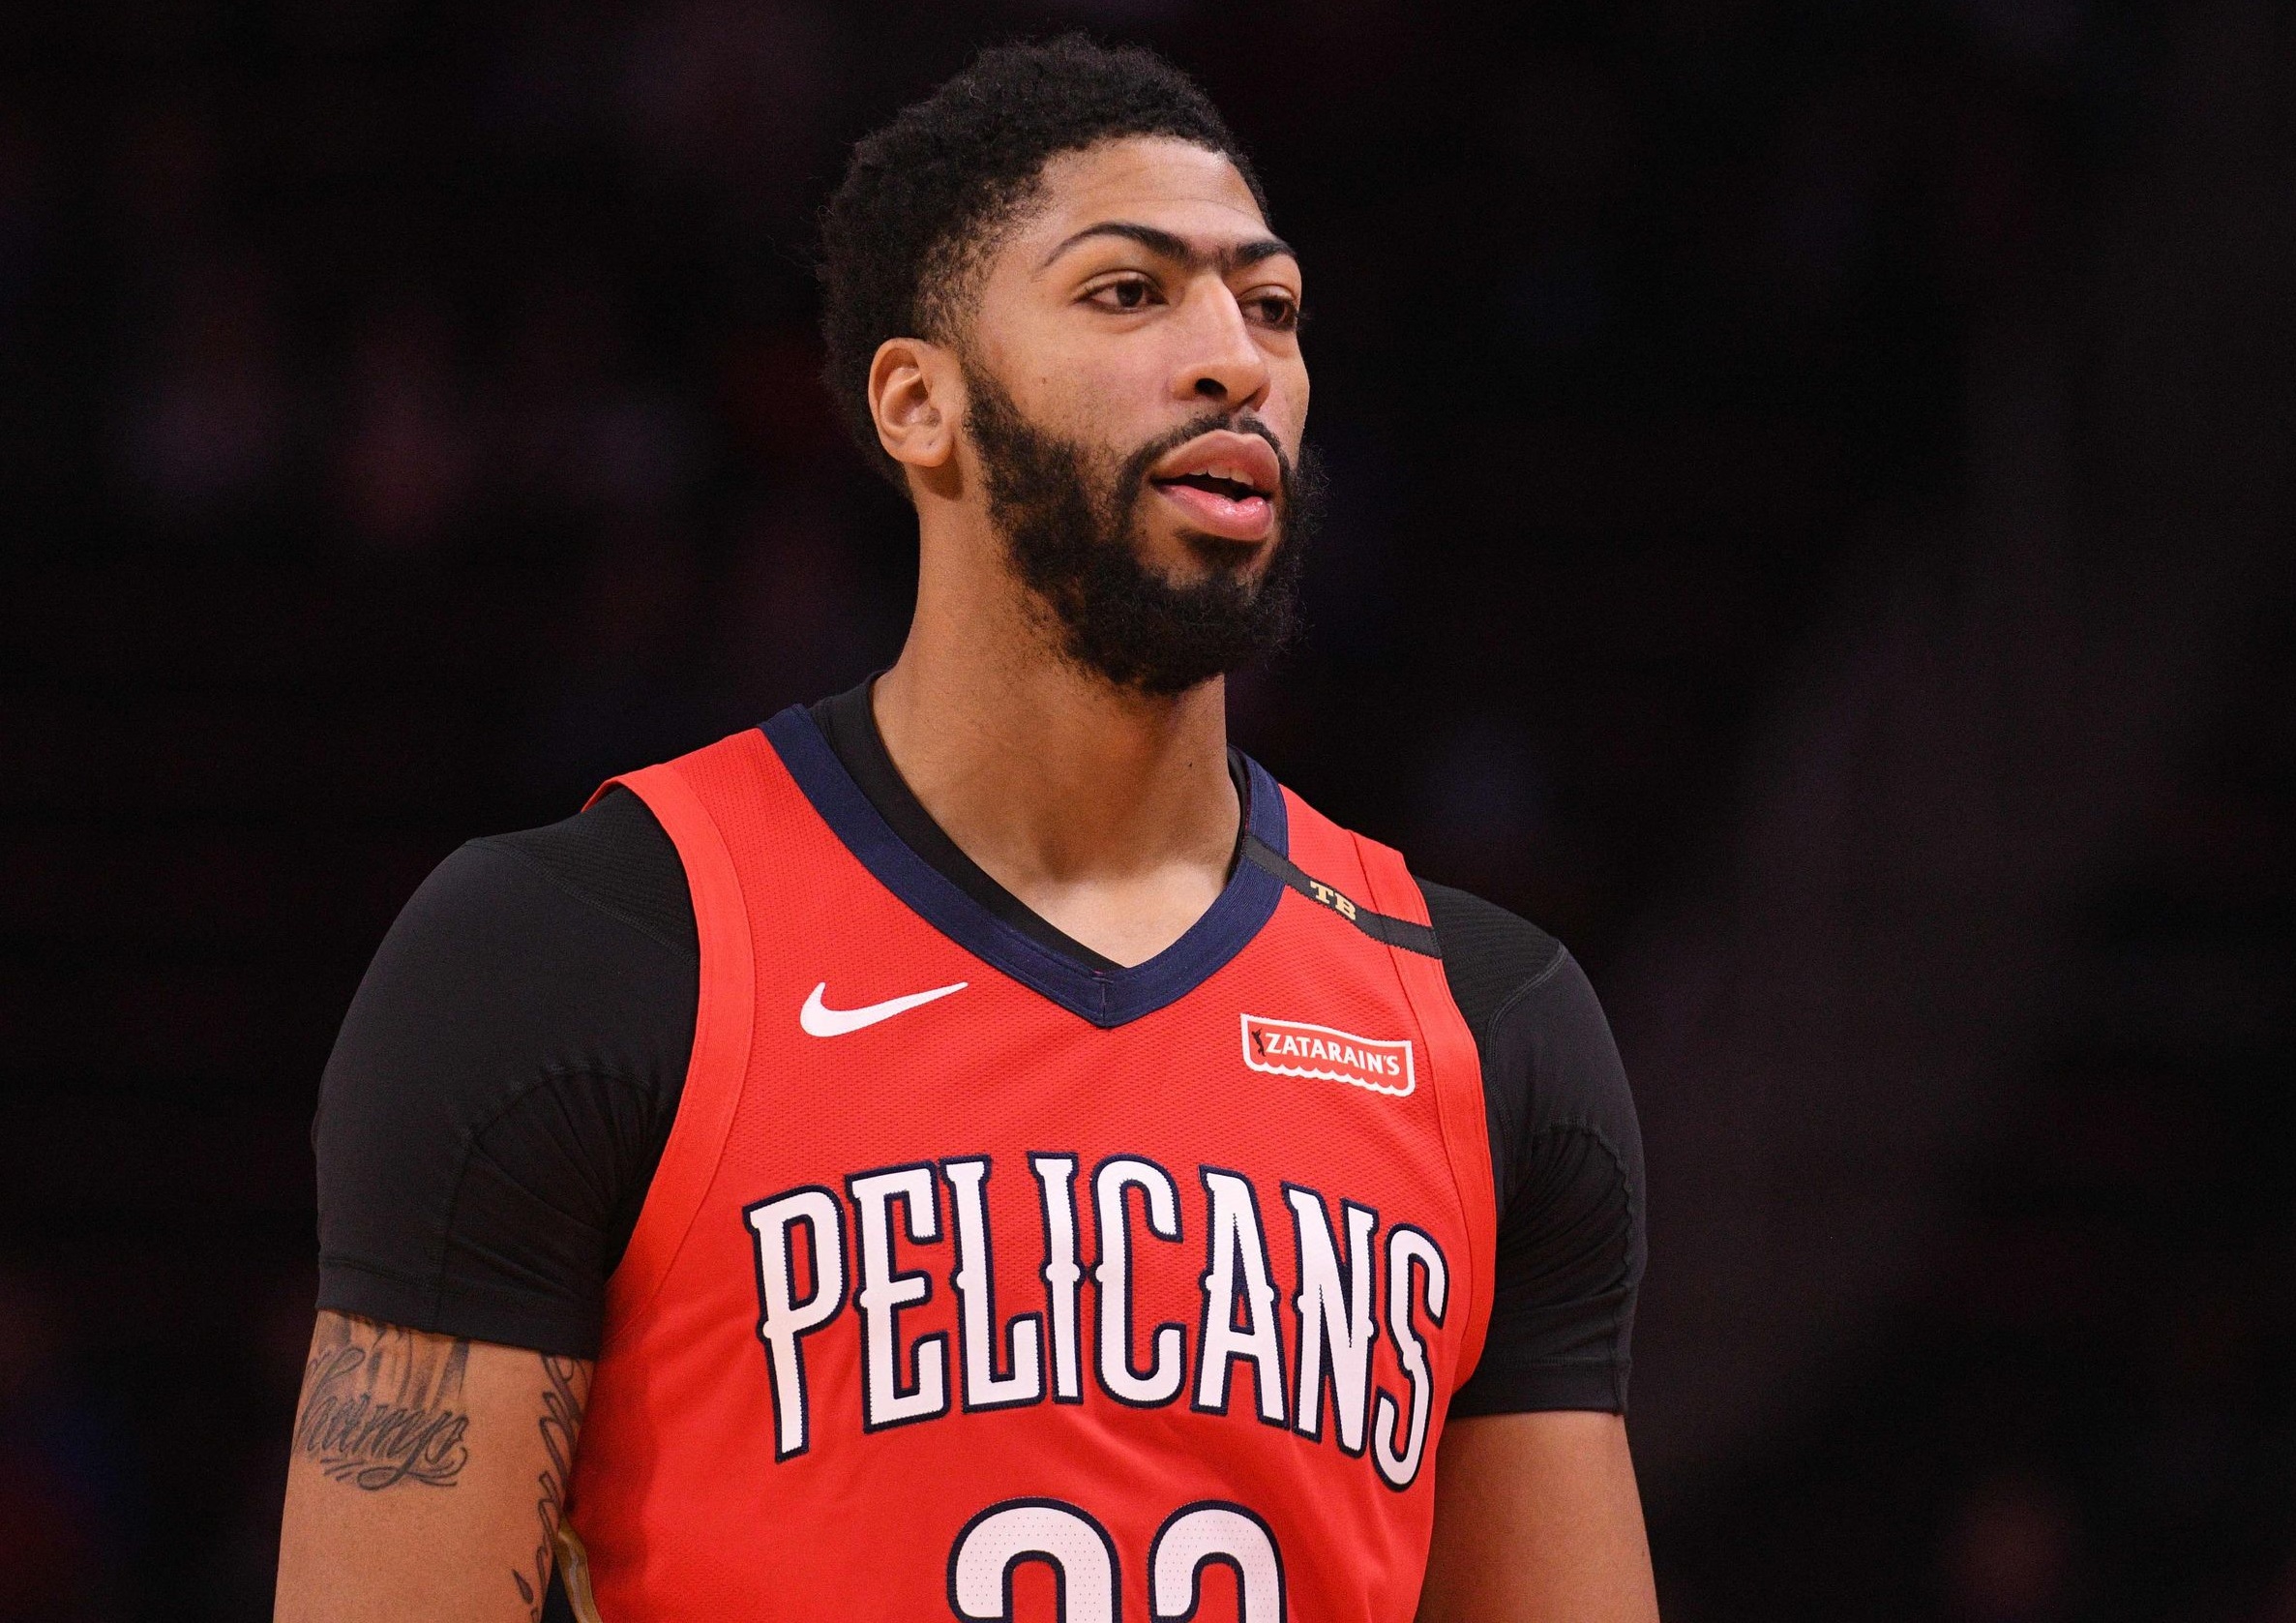 25-year-old NBA star Anthony Davis requested a trade out of the New Orleans Pelicans on Monday.